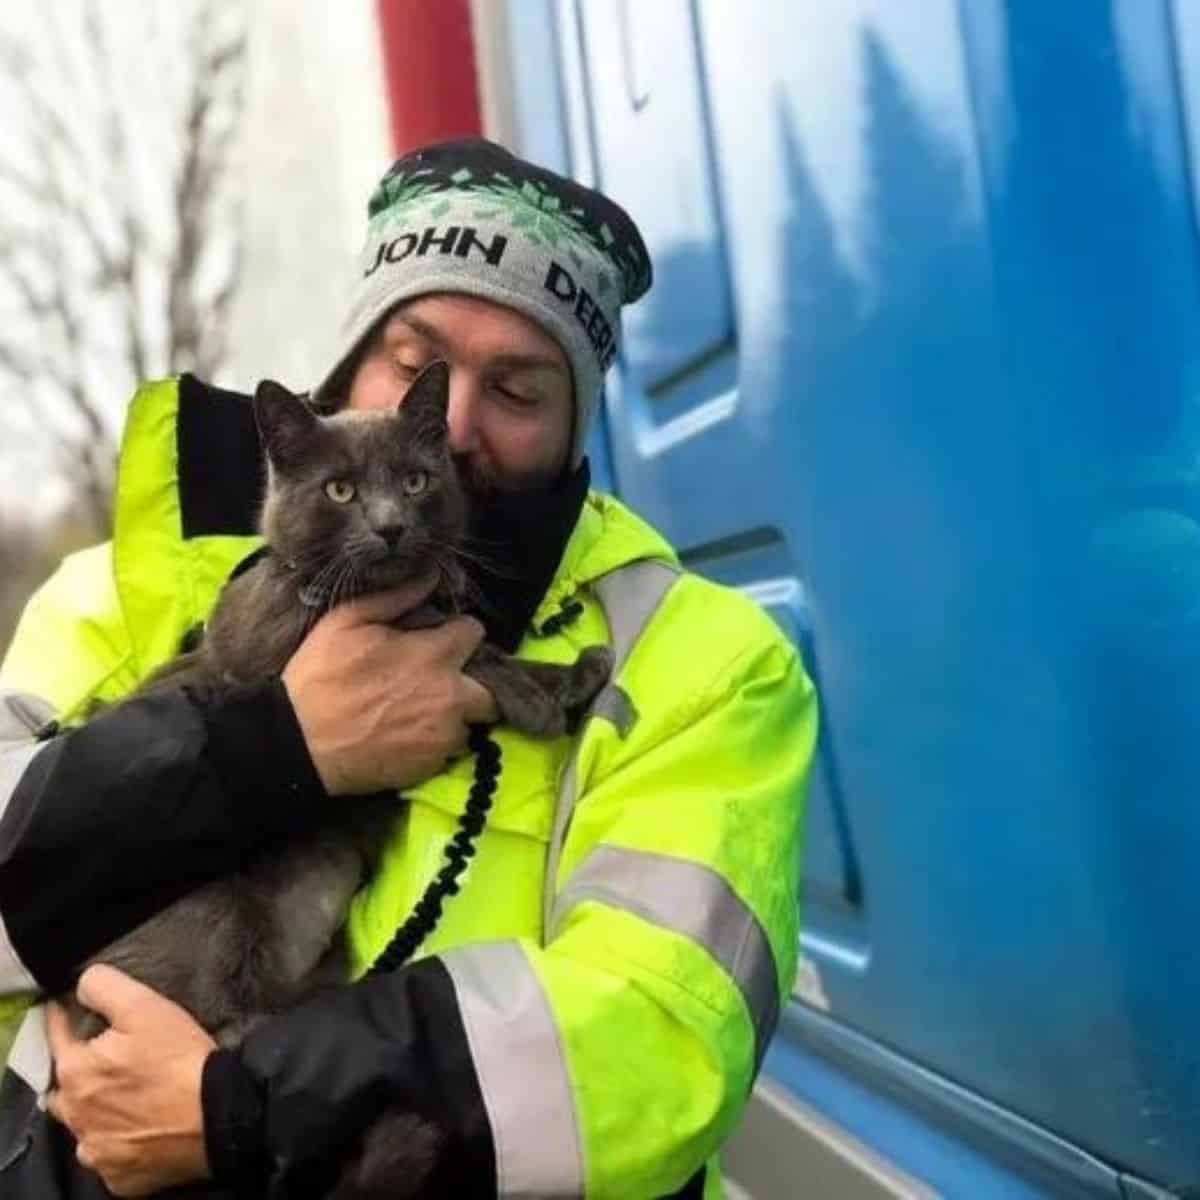 the truck driver holds his cat in his arms